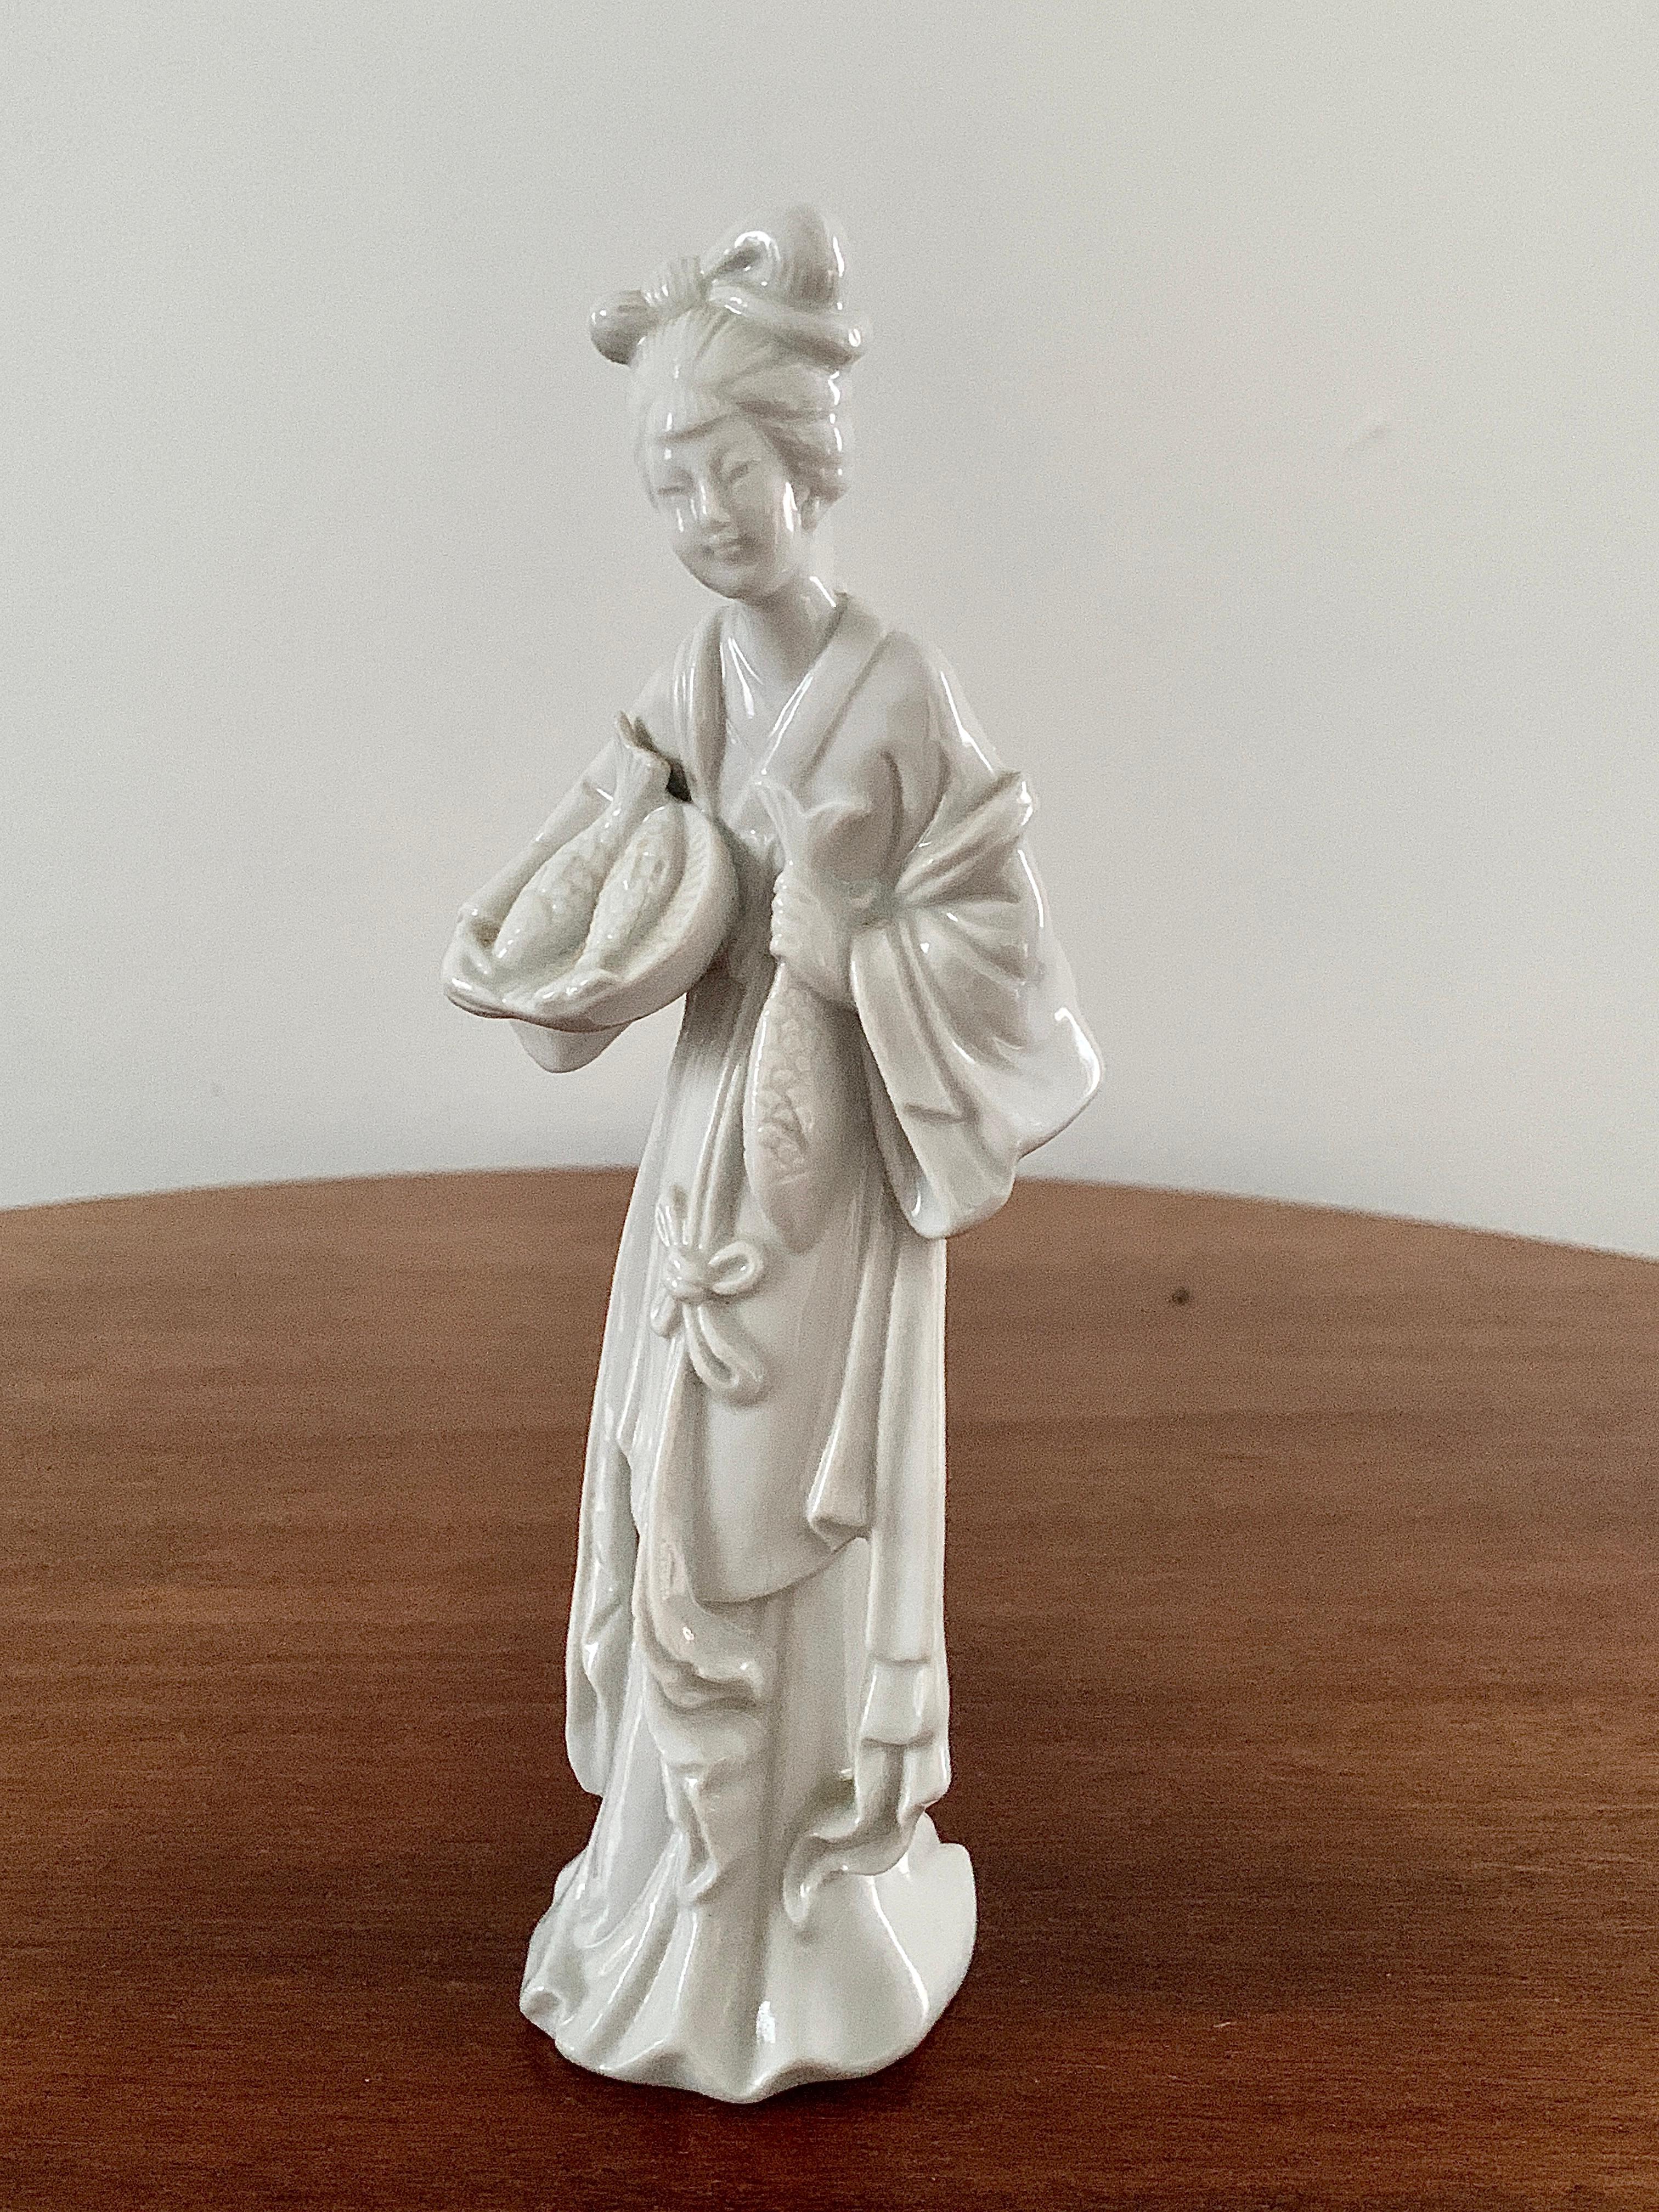 A gorgeous blanc de chine porcelain Chinese woman holding a basket of fish

Circa mid-20th century

Measures: 3